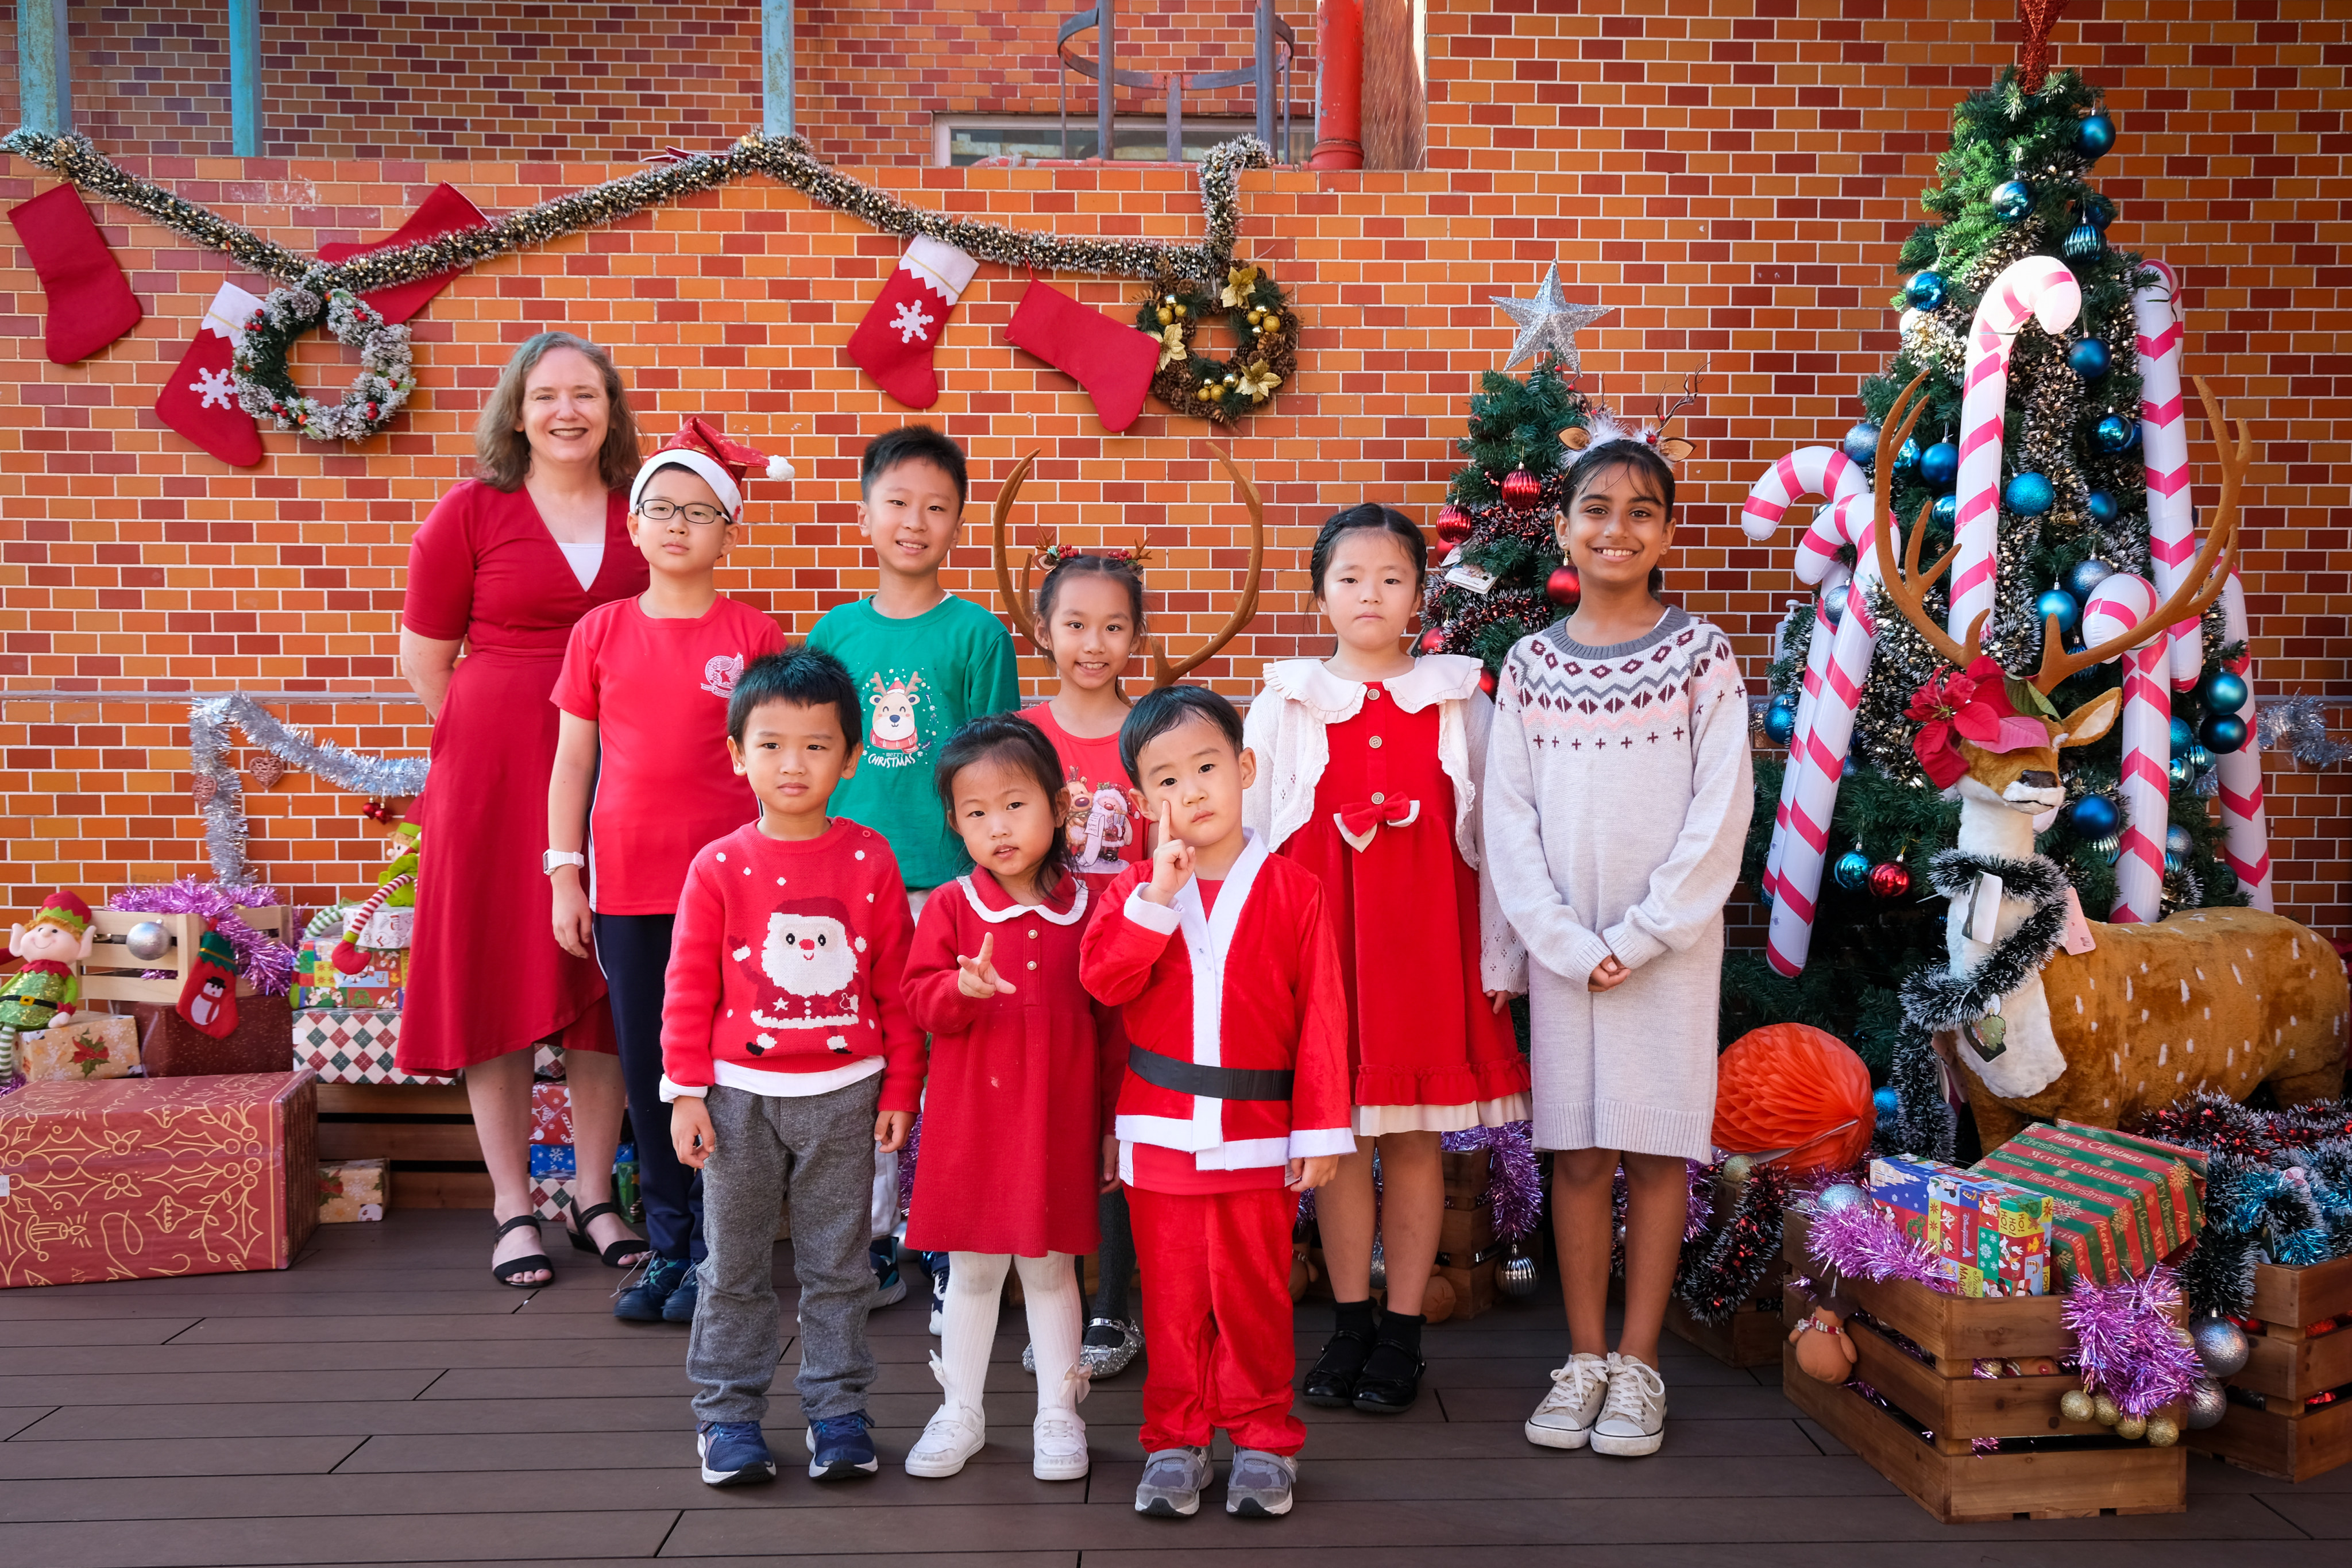 American International School organised a charitable “free dress day” to raise funds for Operation Santa Claus. Photo: Handout